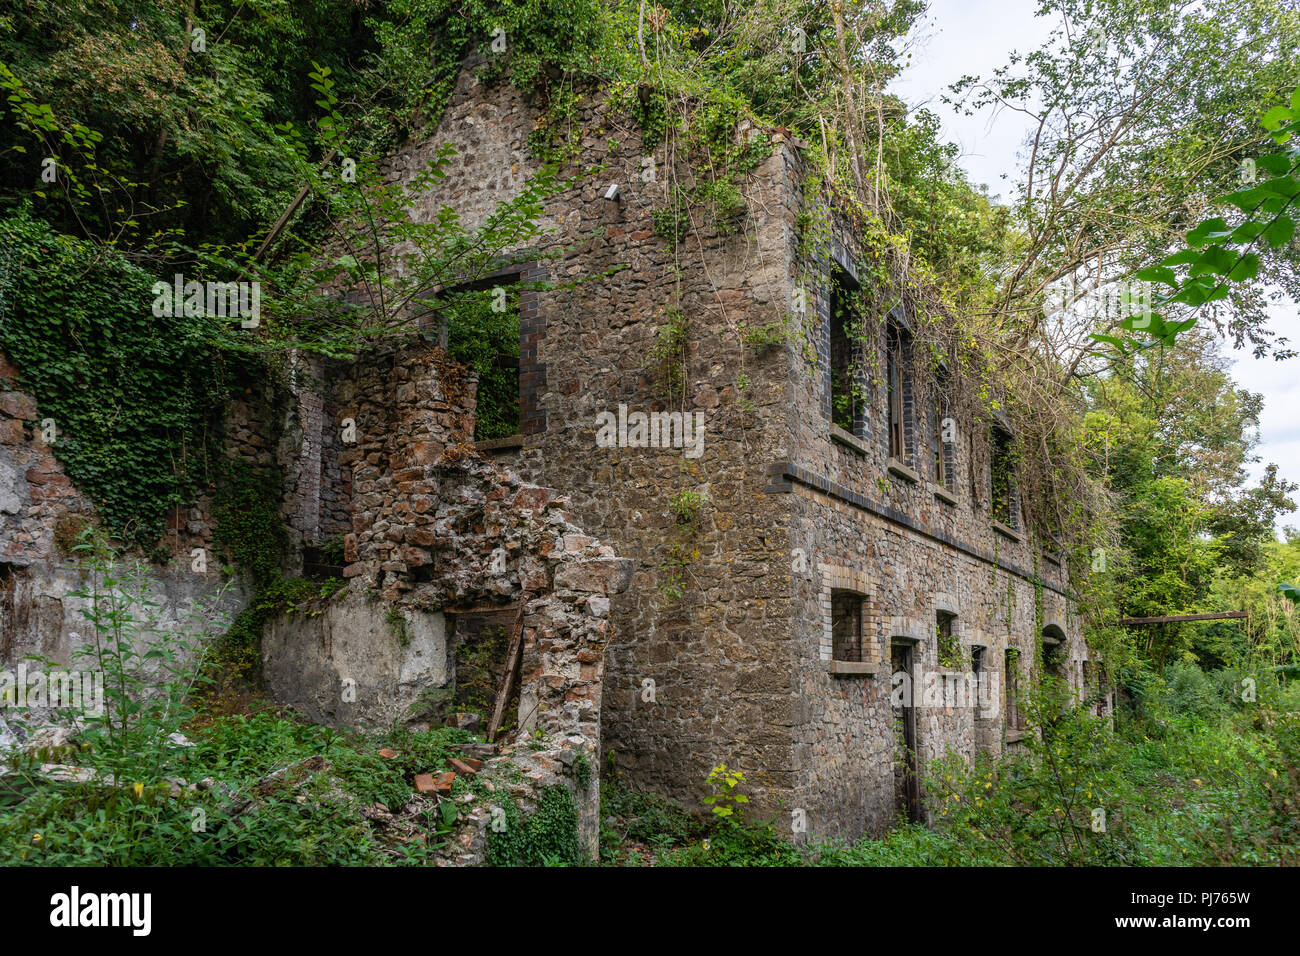 The abandoned remains of the Fussell's Lower Iron Works in the so called Fussell Country near Mells in Sommerset, England, UK Stock Photo